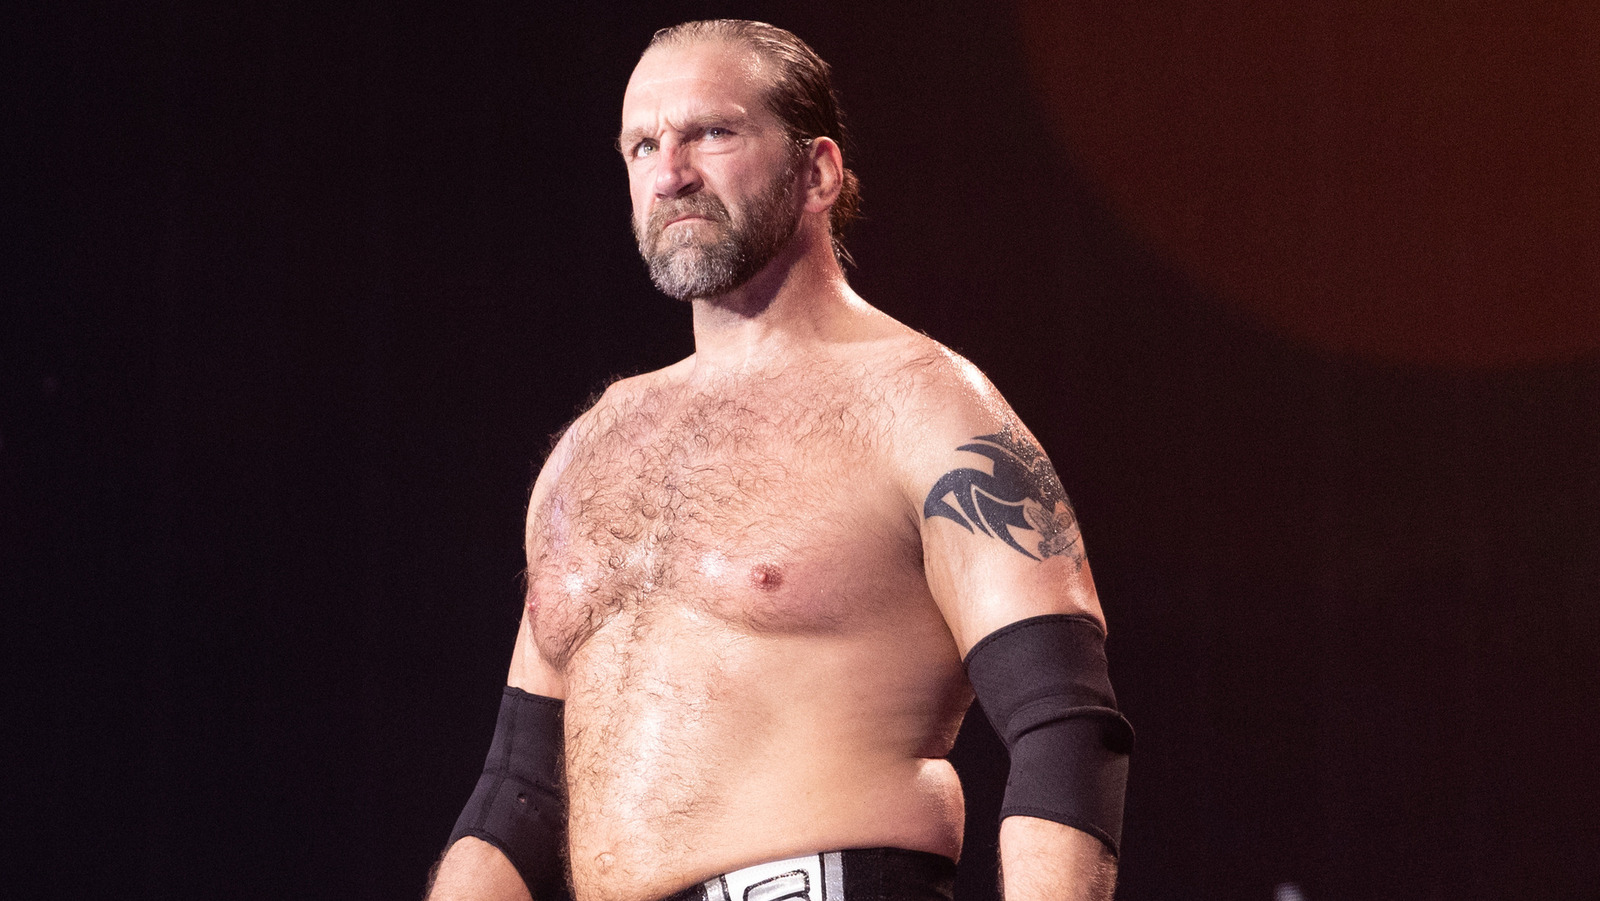 Why Silas Young Calls 2021 ROH Closure 'A Kick In The B***s'